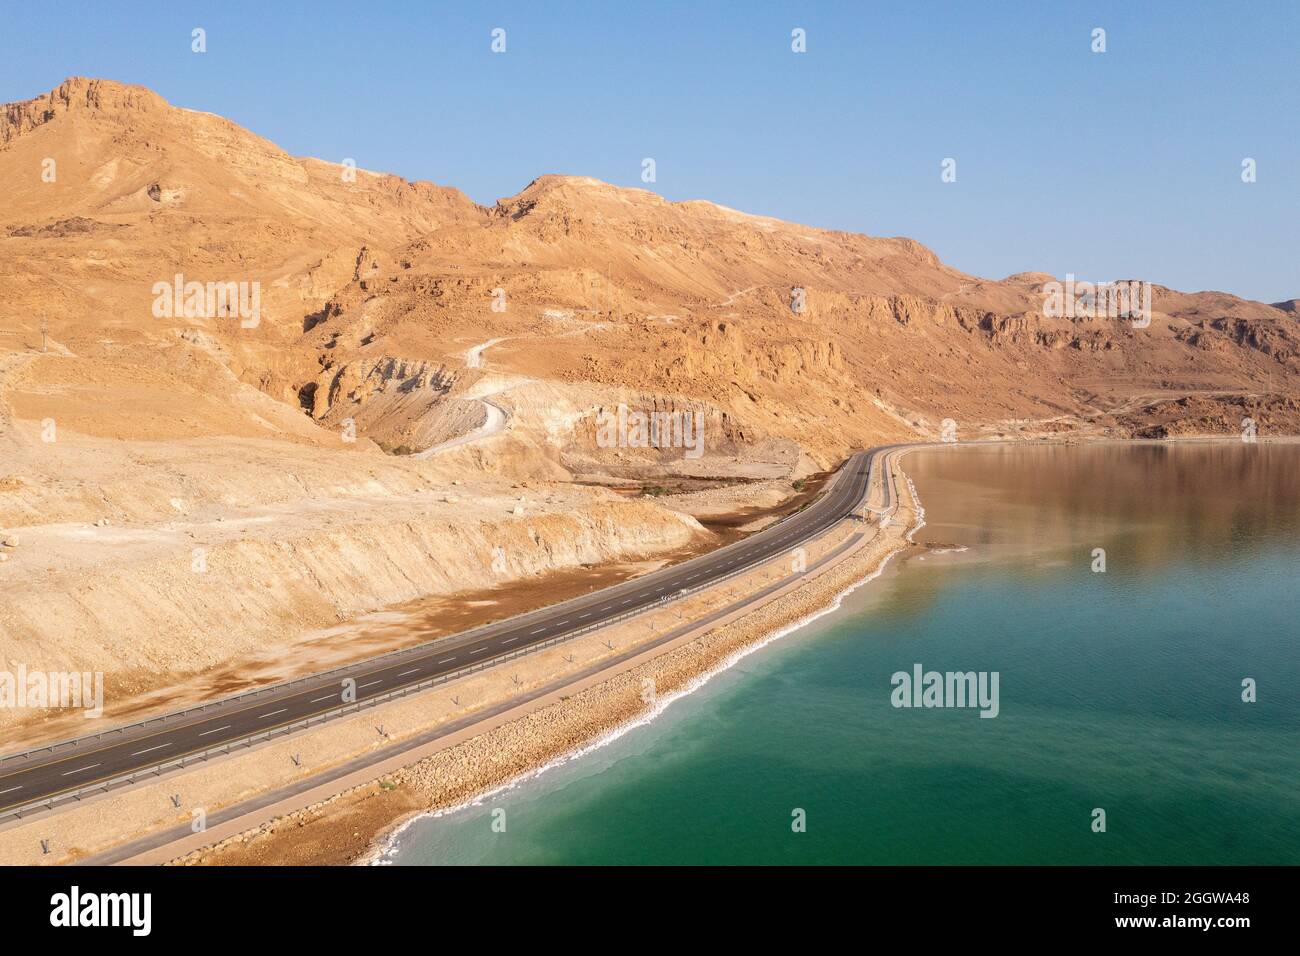 Dead Sea coastline and highway with desert mountains, Aerial view. Stock Photo